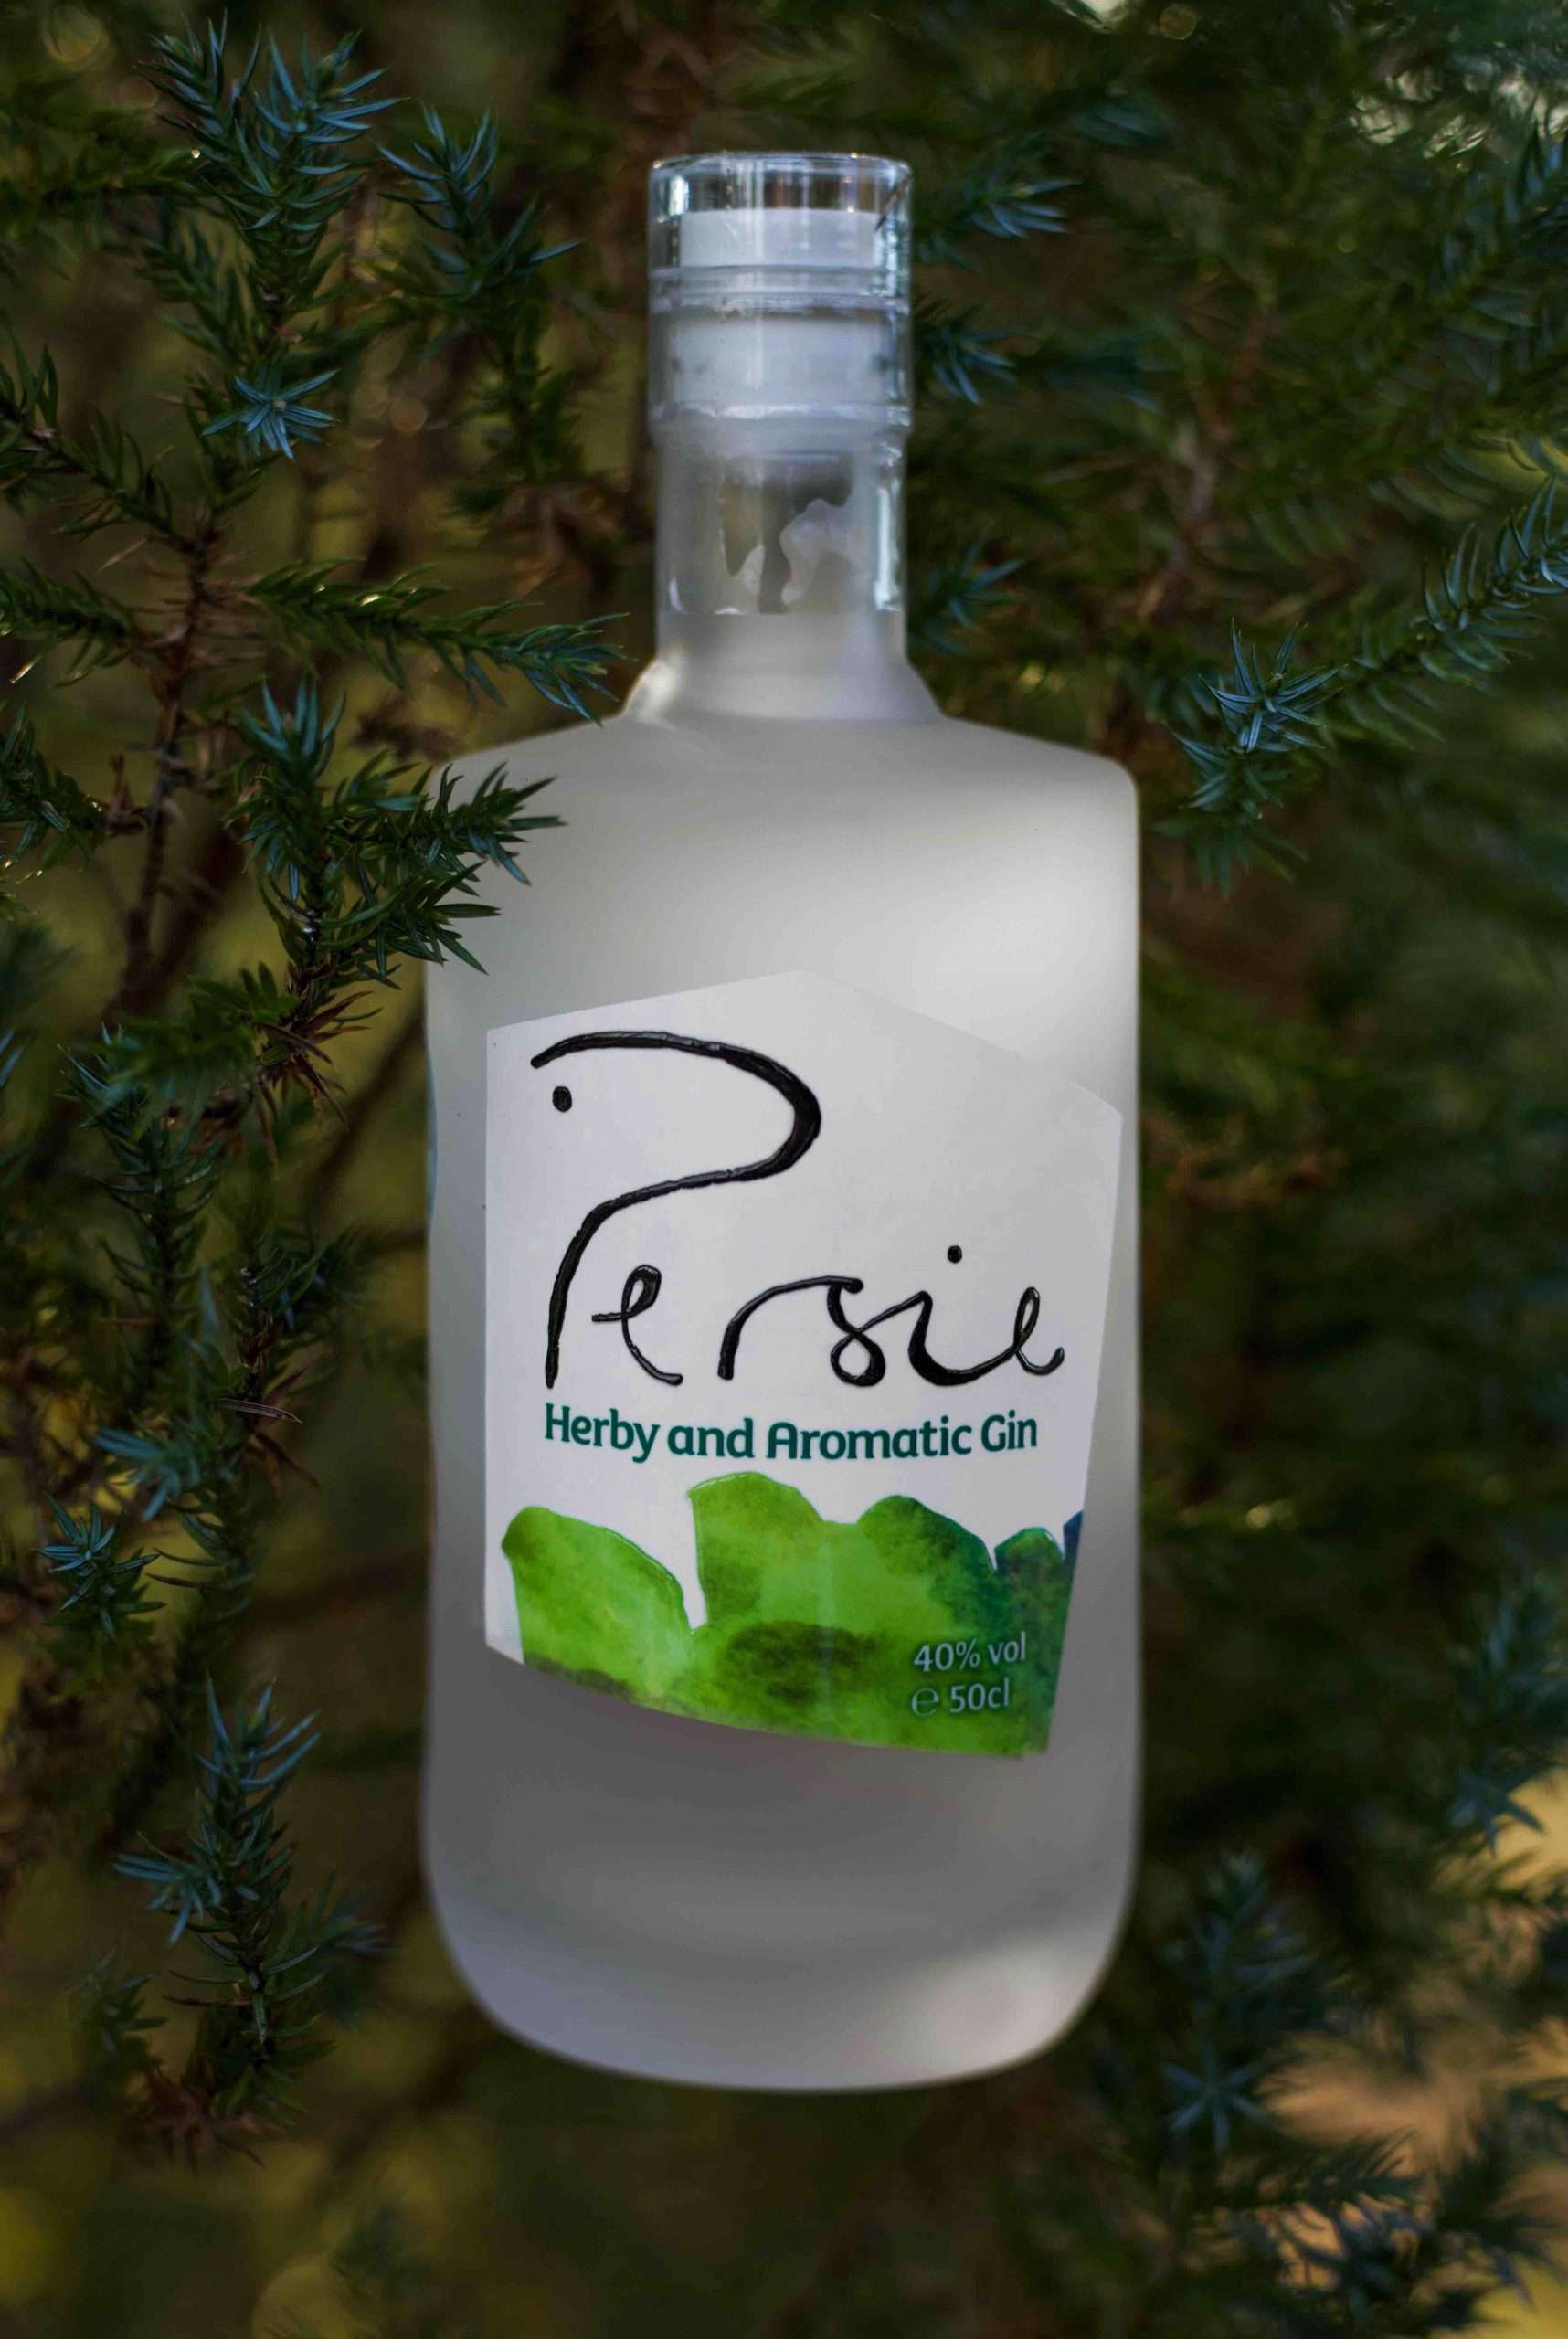 Persie Herby Aromatic Gin Gins & Gin Liqueurs